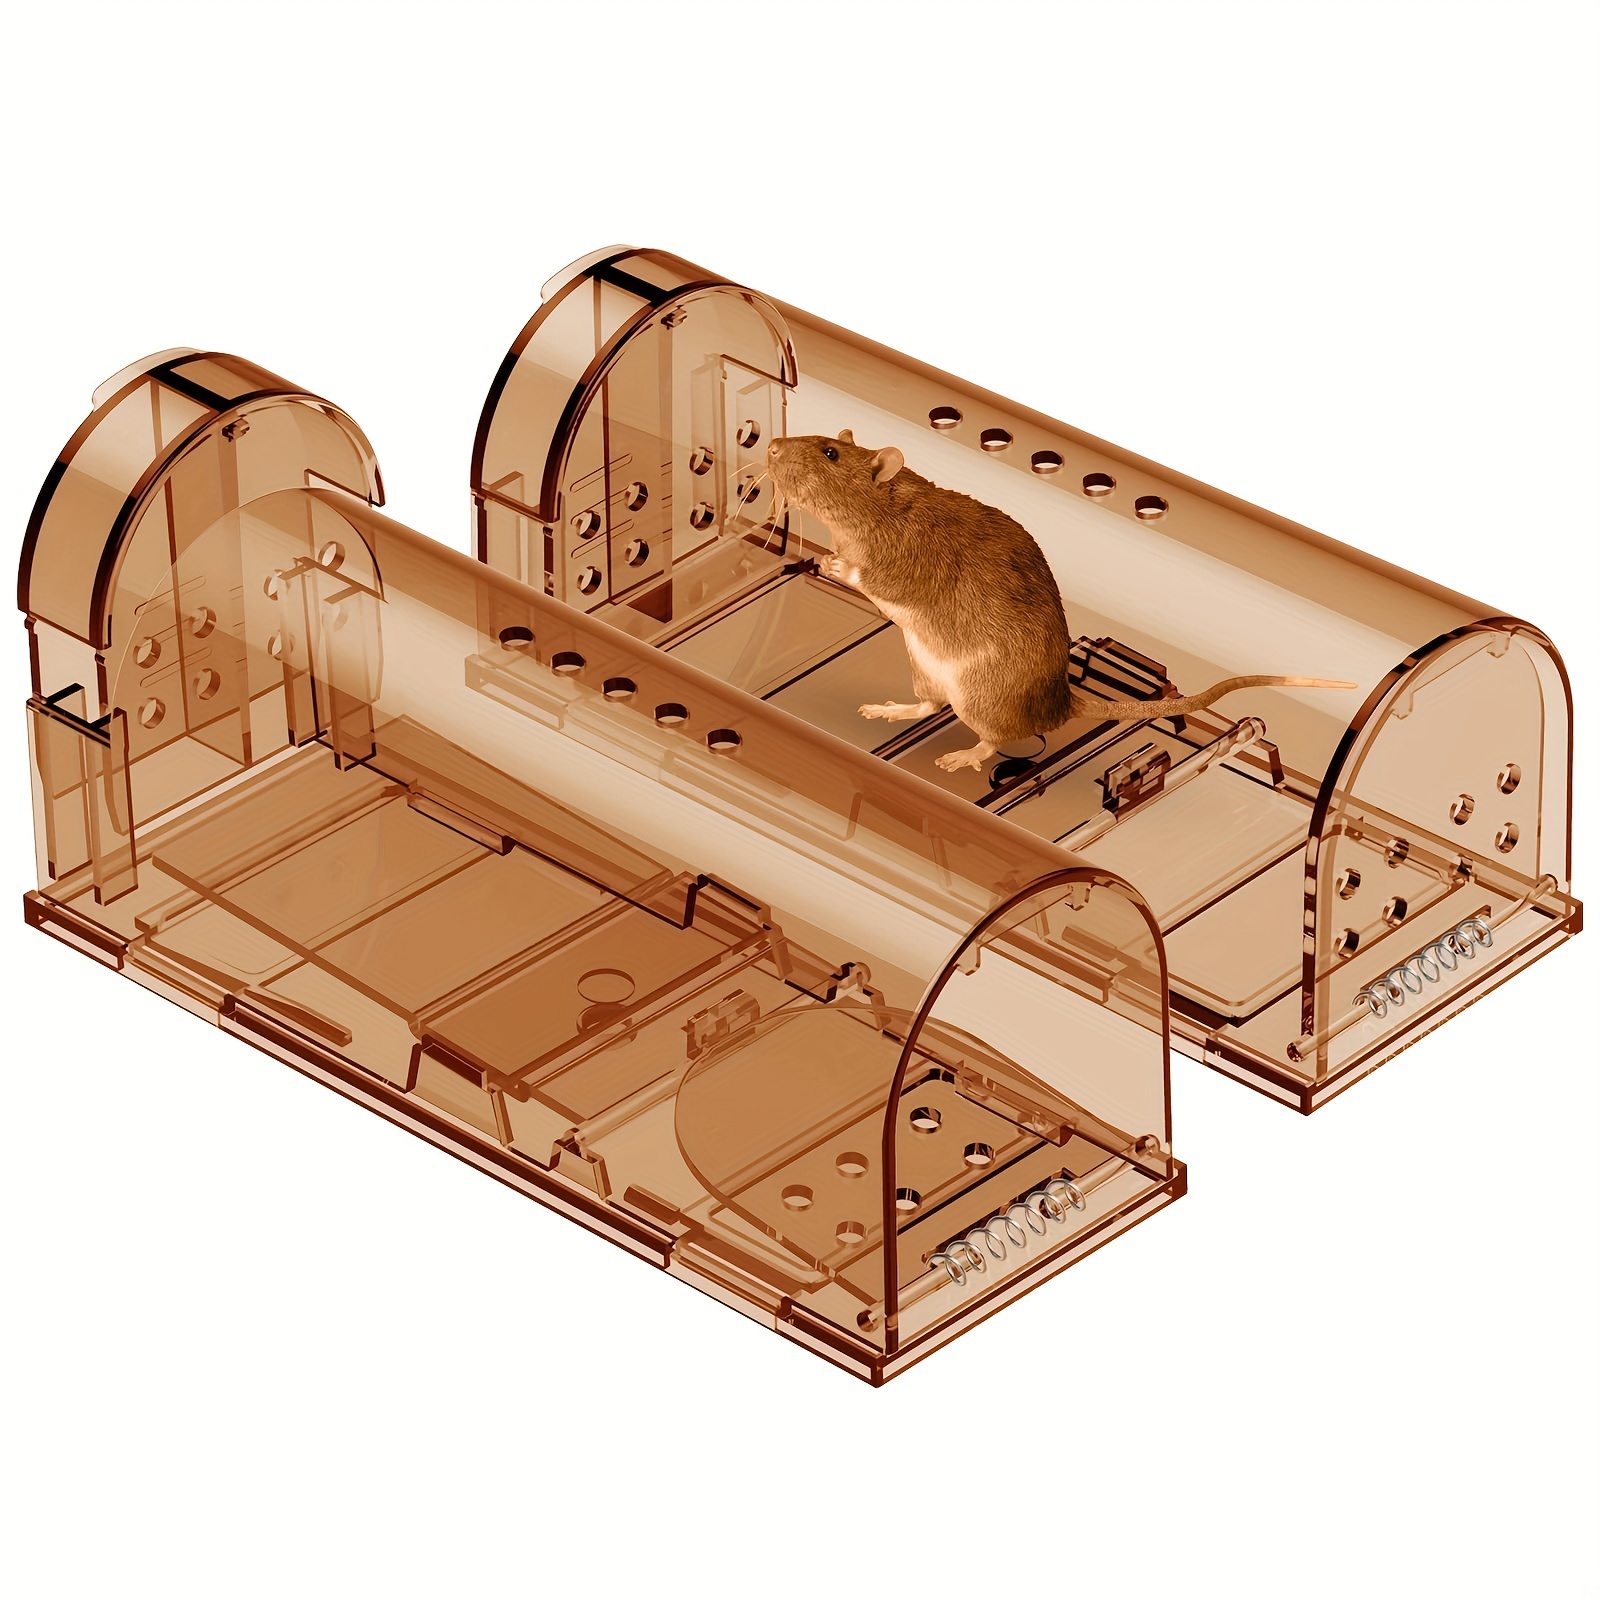  Humane Mouse Traps Indoor Outdoor Chipmunk Humane Rat Traps  That Work Live Mouse Trap No Kill Mouse Traps Catch and Release Plastic  Vole Hamster Mole Traps Safe Trap for House